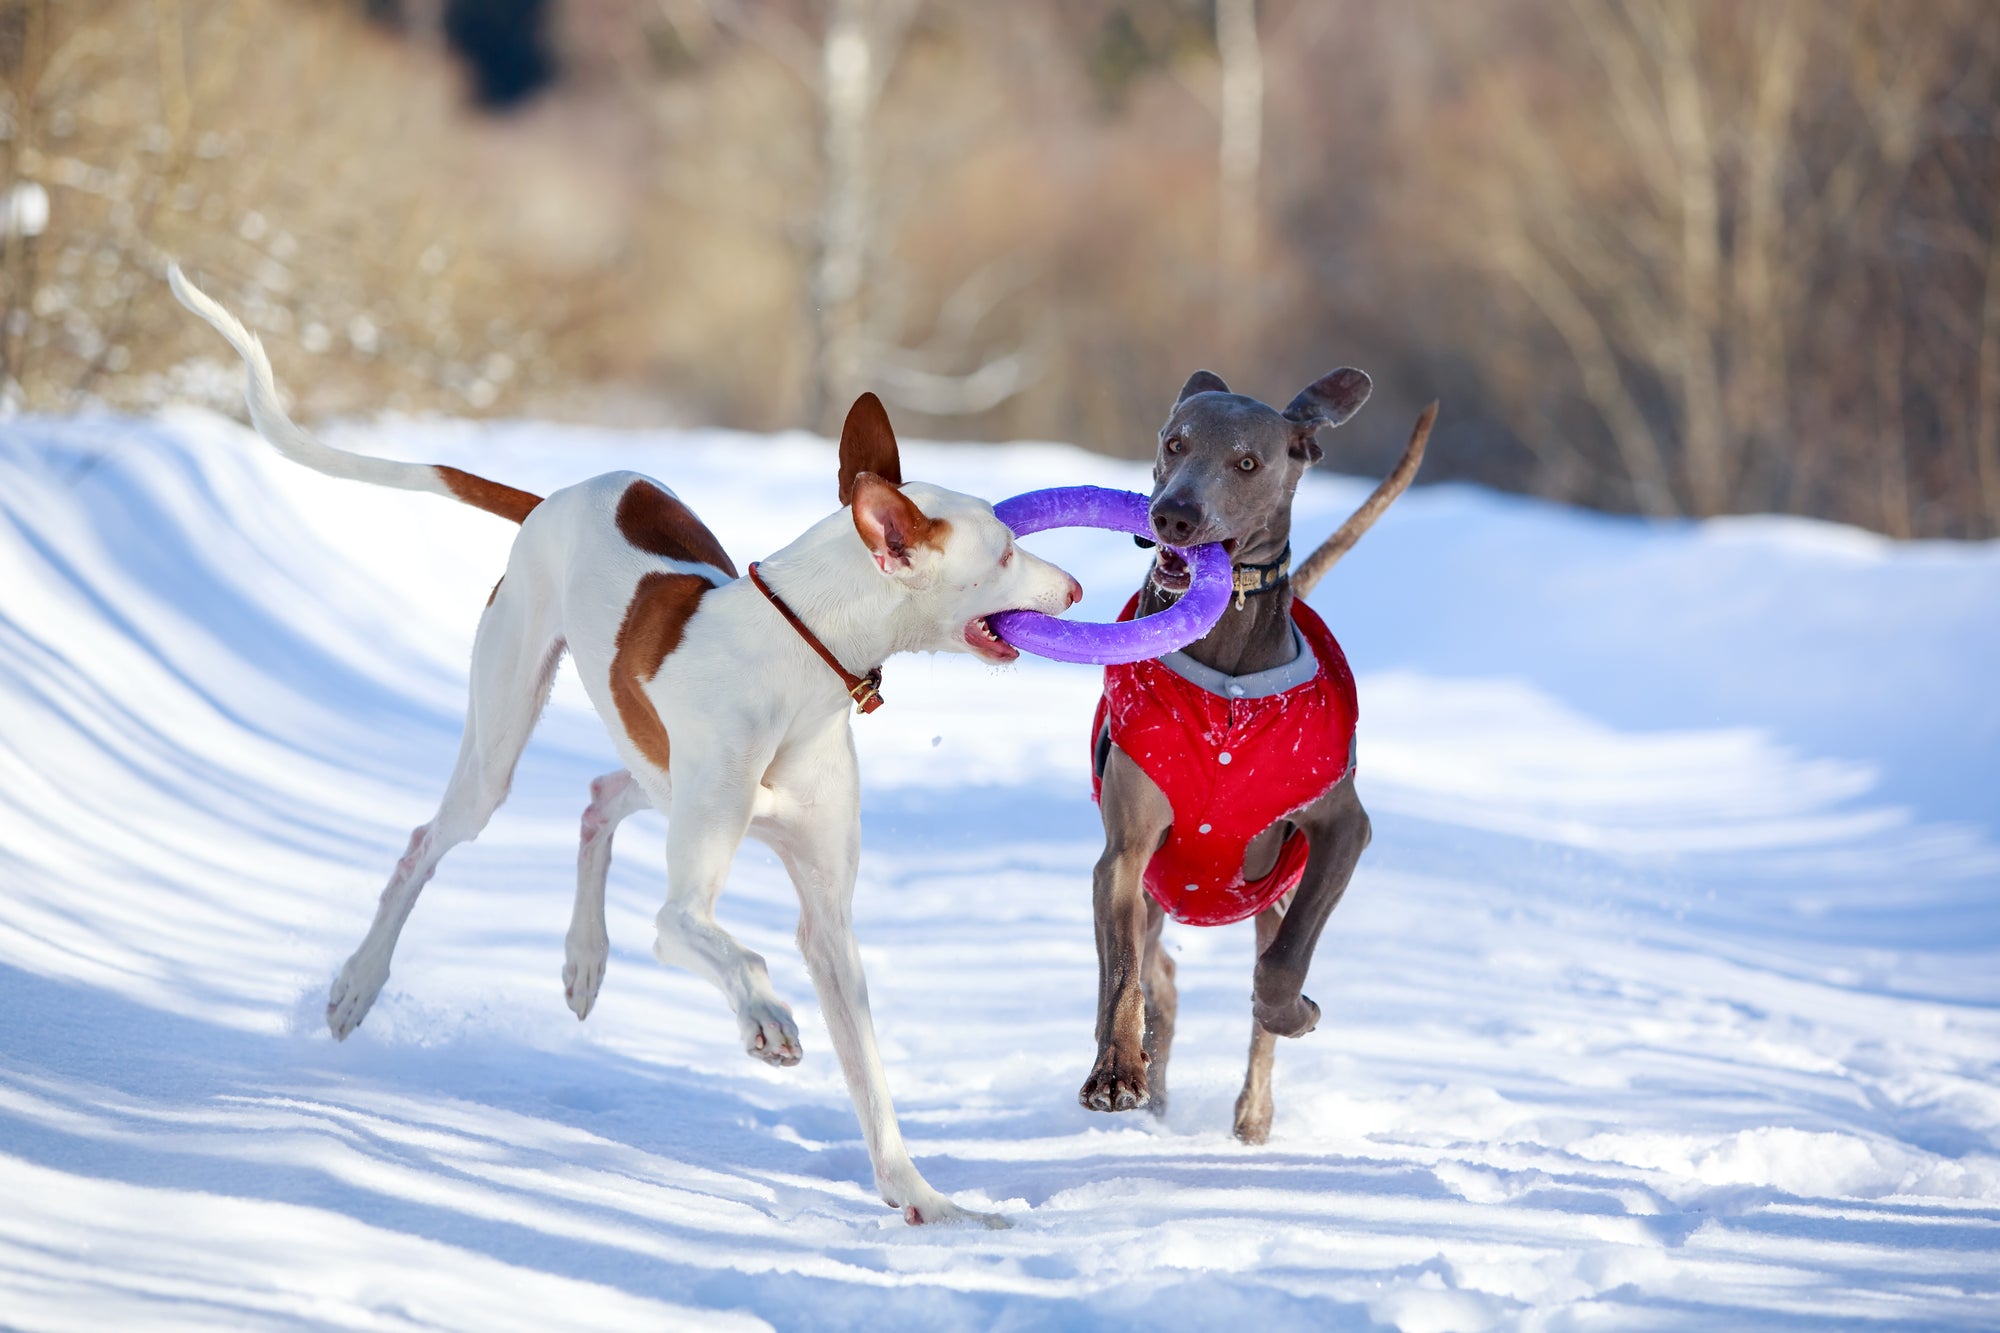 ‘Tis the season for indoor activities that keep your fur baby moving, entertained and stimulated! And with the holidays knocking on our door, it’s the perfect time to treat your precious pup to some great new toys and activities! 